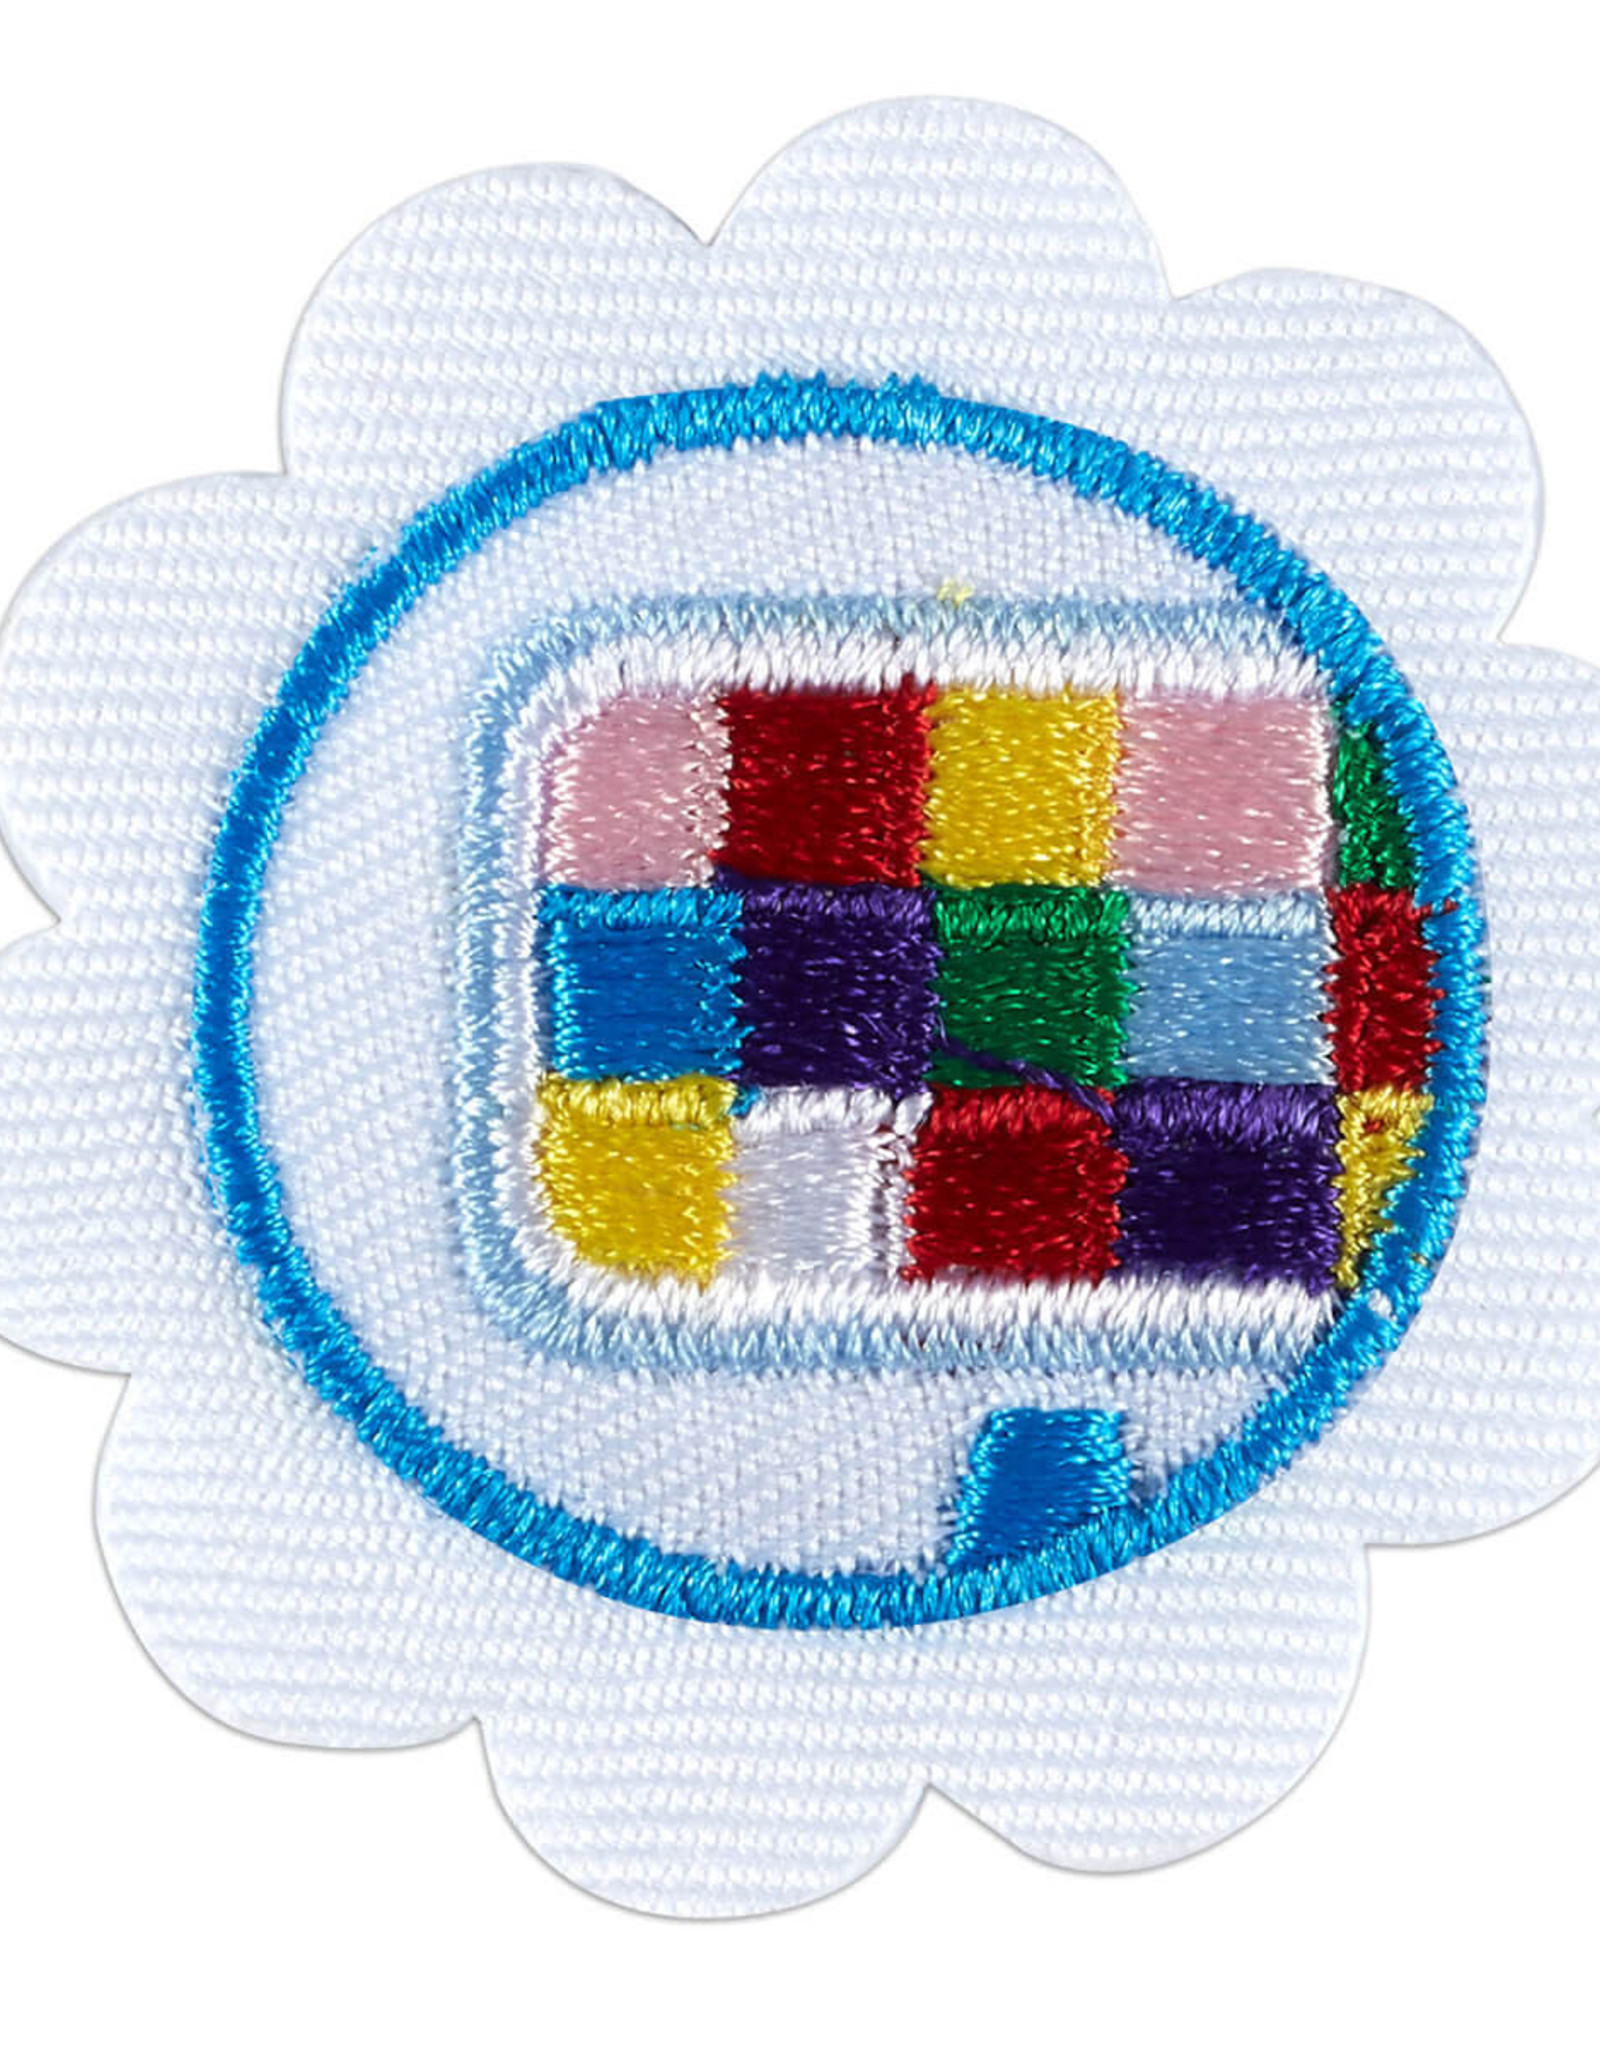 GIRL SCOUTS OF THE USA Daisy App Development 3 Badge